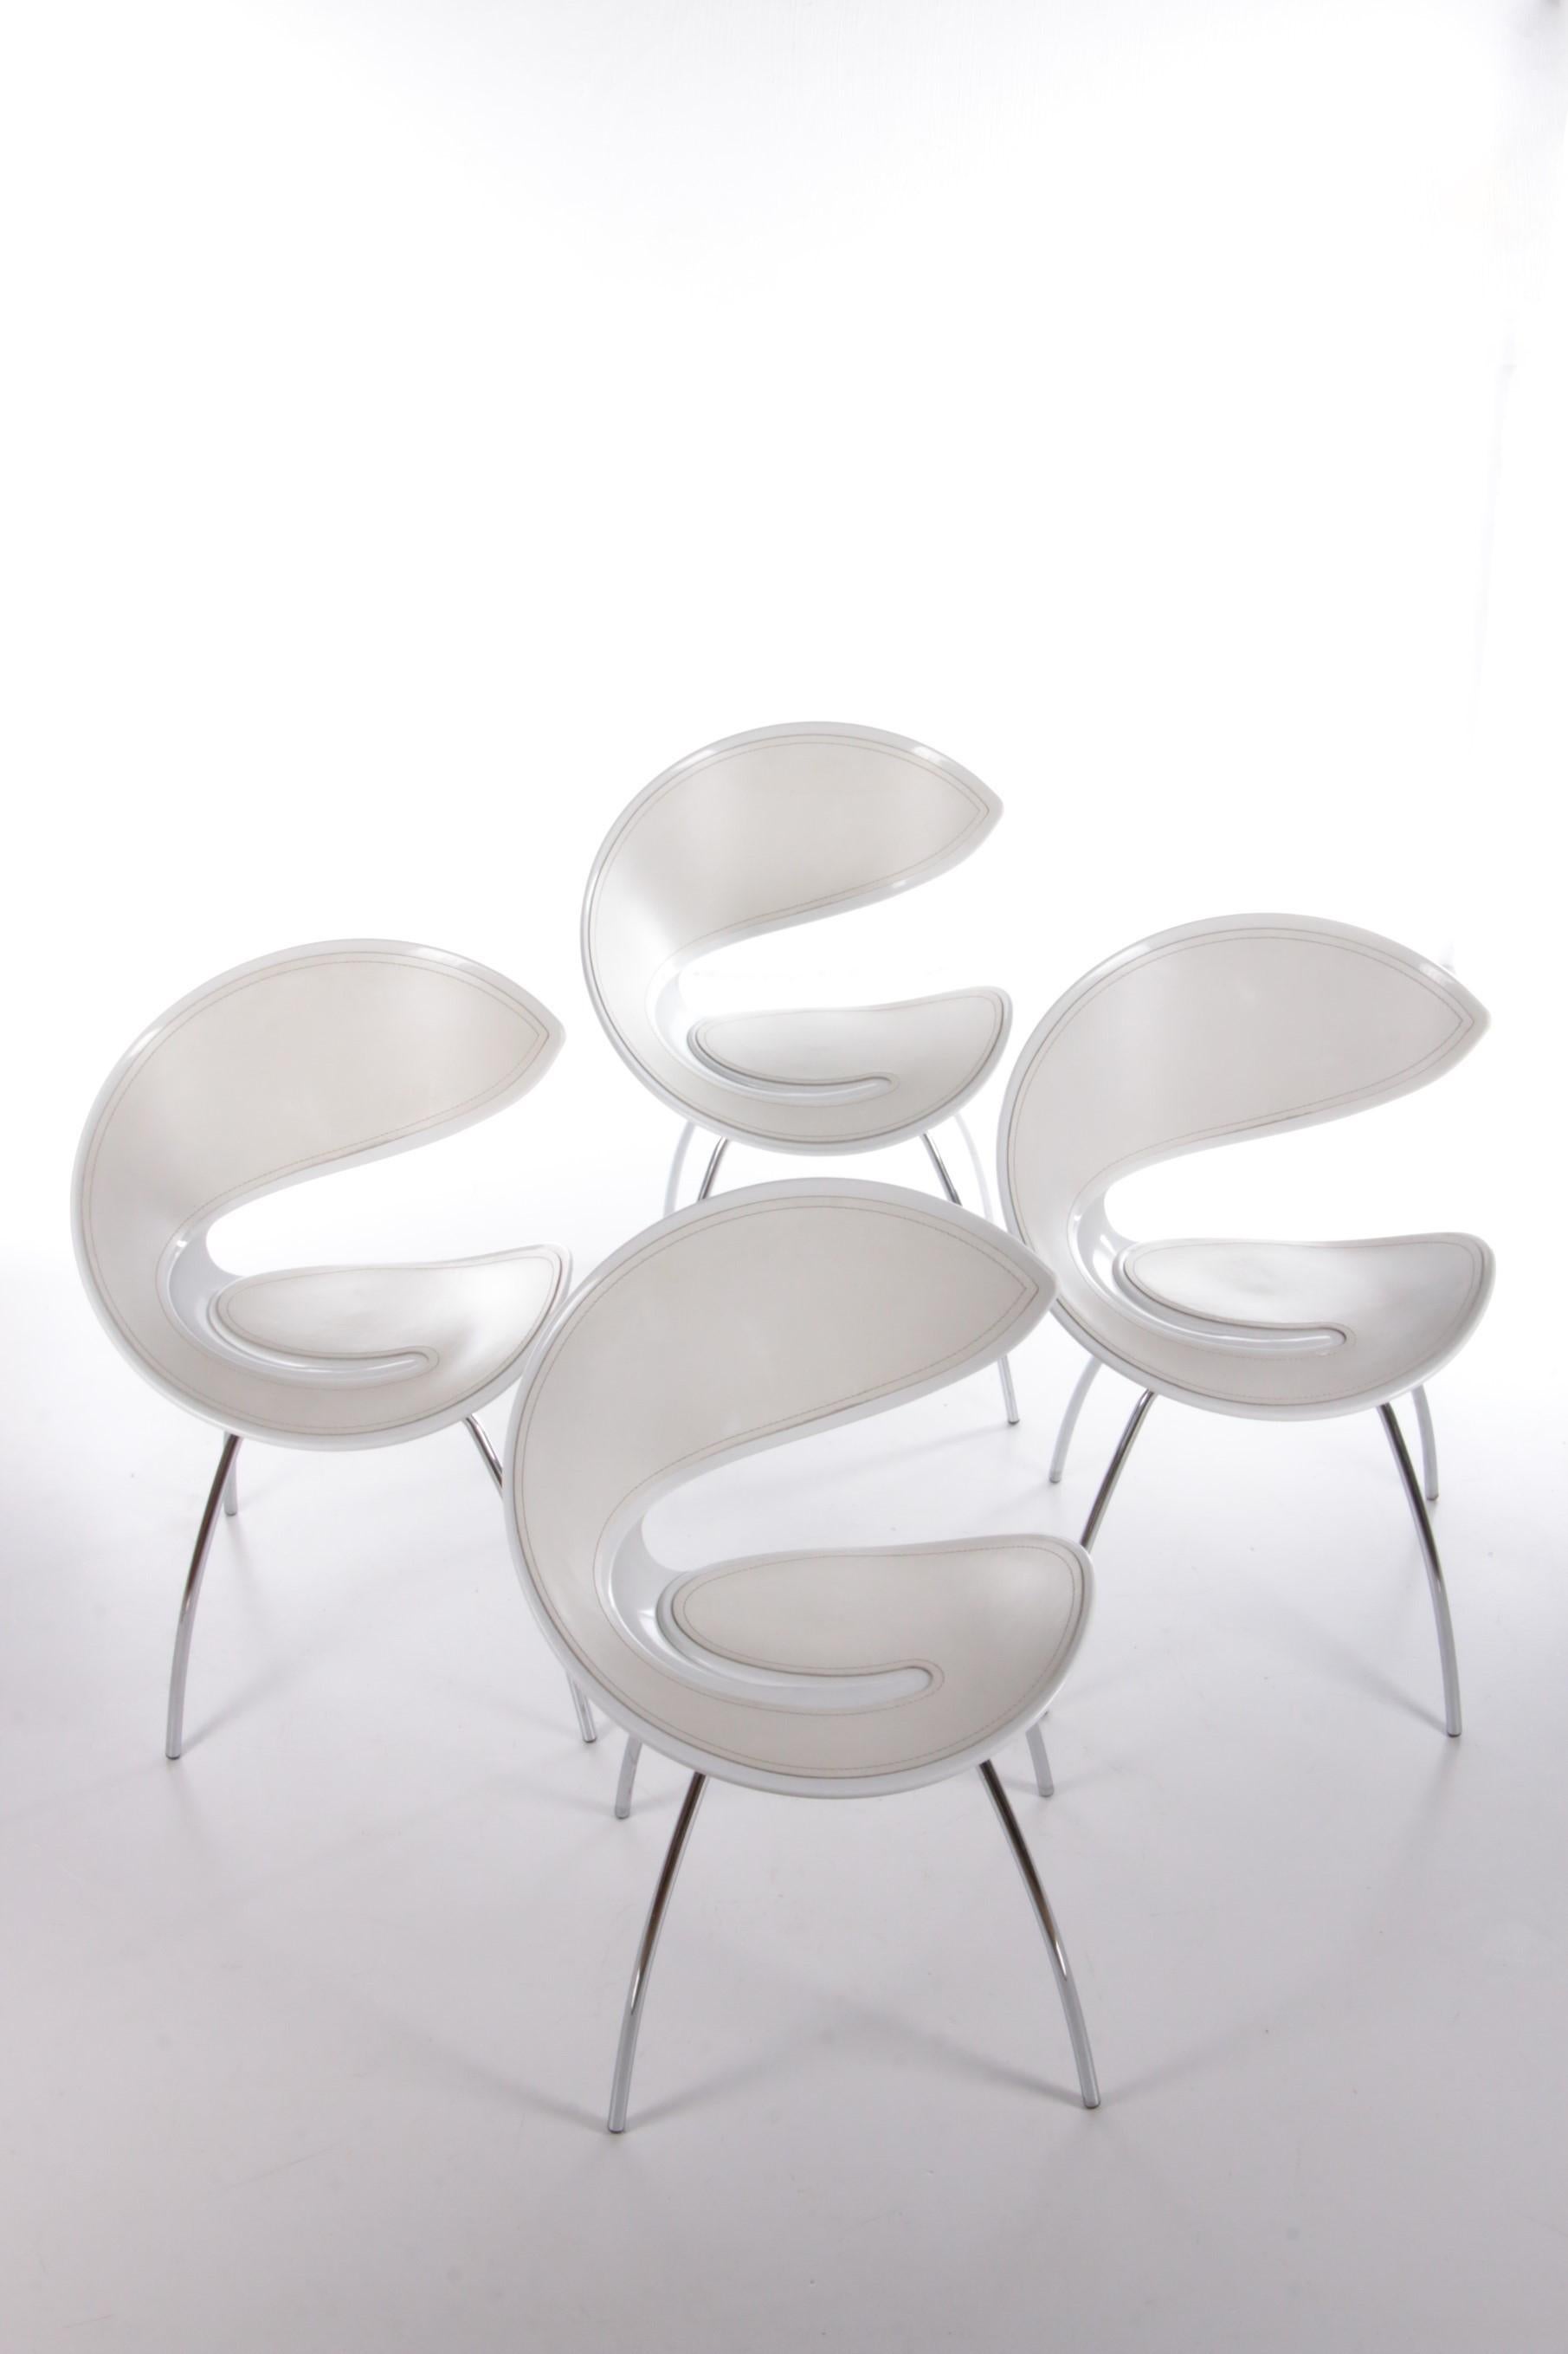 Set of Italian dining room chairs Model Twist with leather and chrome legs.


Twist chair from Midj with four legs in white or chromed steel with a leather cover.

The shell is made of Hirek, a variable density multi-layer composite